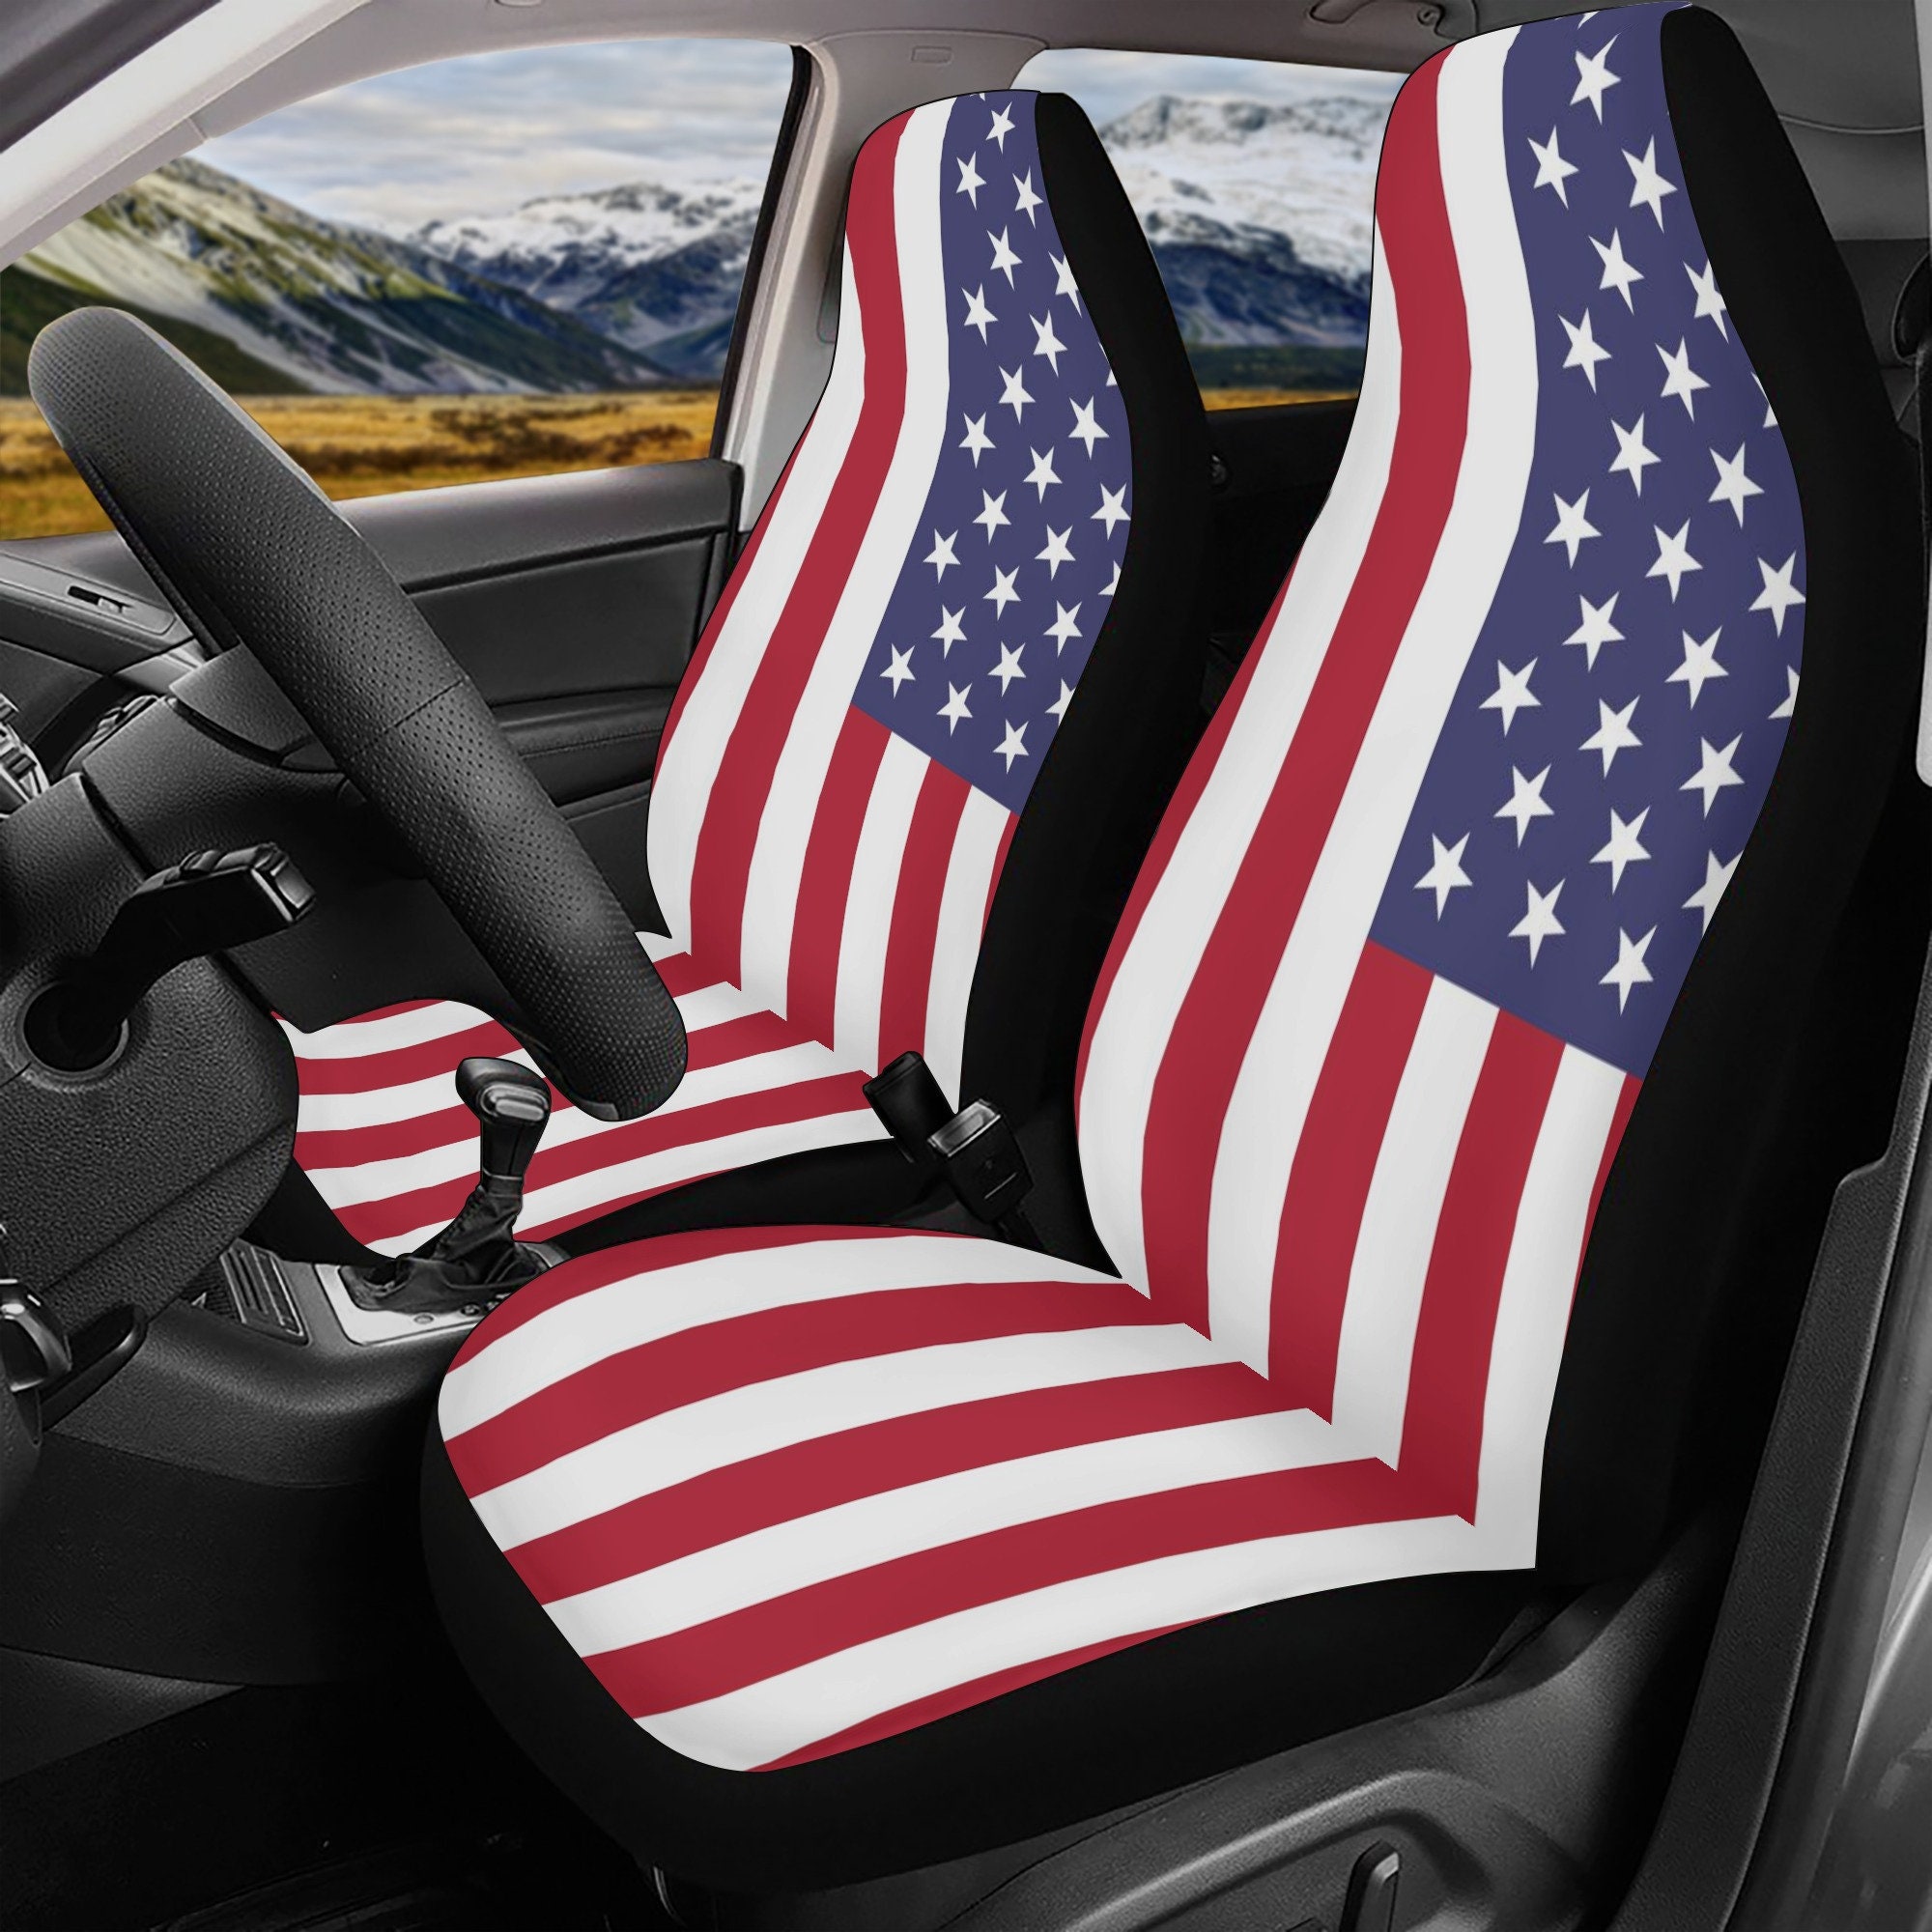 Pzuqiu Patriotic American Flag Car Seat Cover Full Set 4 Piece Hunting Deer  Skull Auto Accessories Truck Bench Protector Front and Back Seat Covers for  SUV Vehicle Interior Decoration Stretchy 